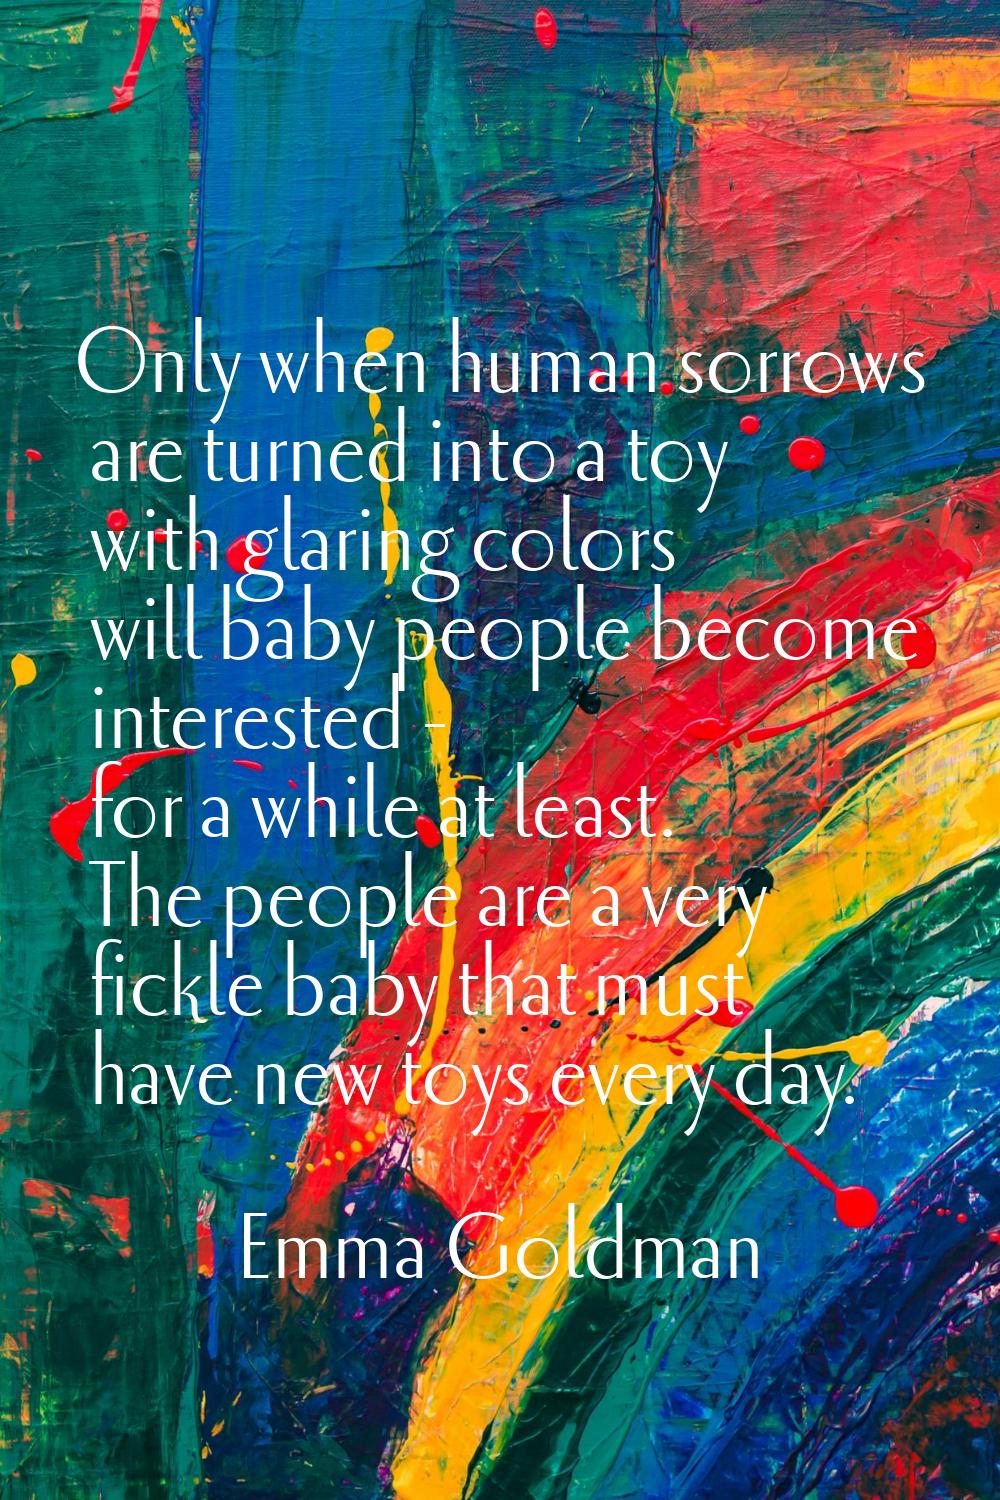 Only when human sorrows are turned into a toy with glaring colors will baby people become intereste